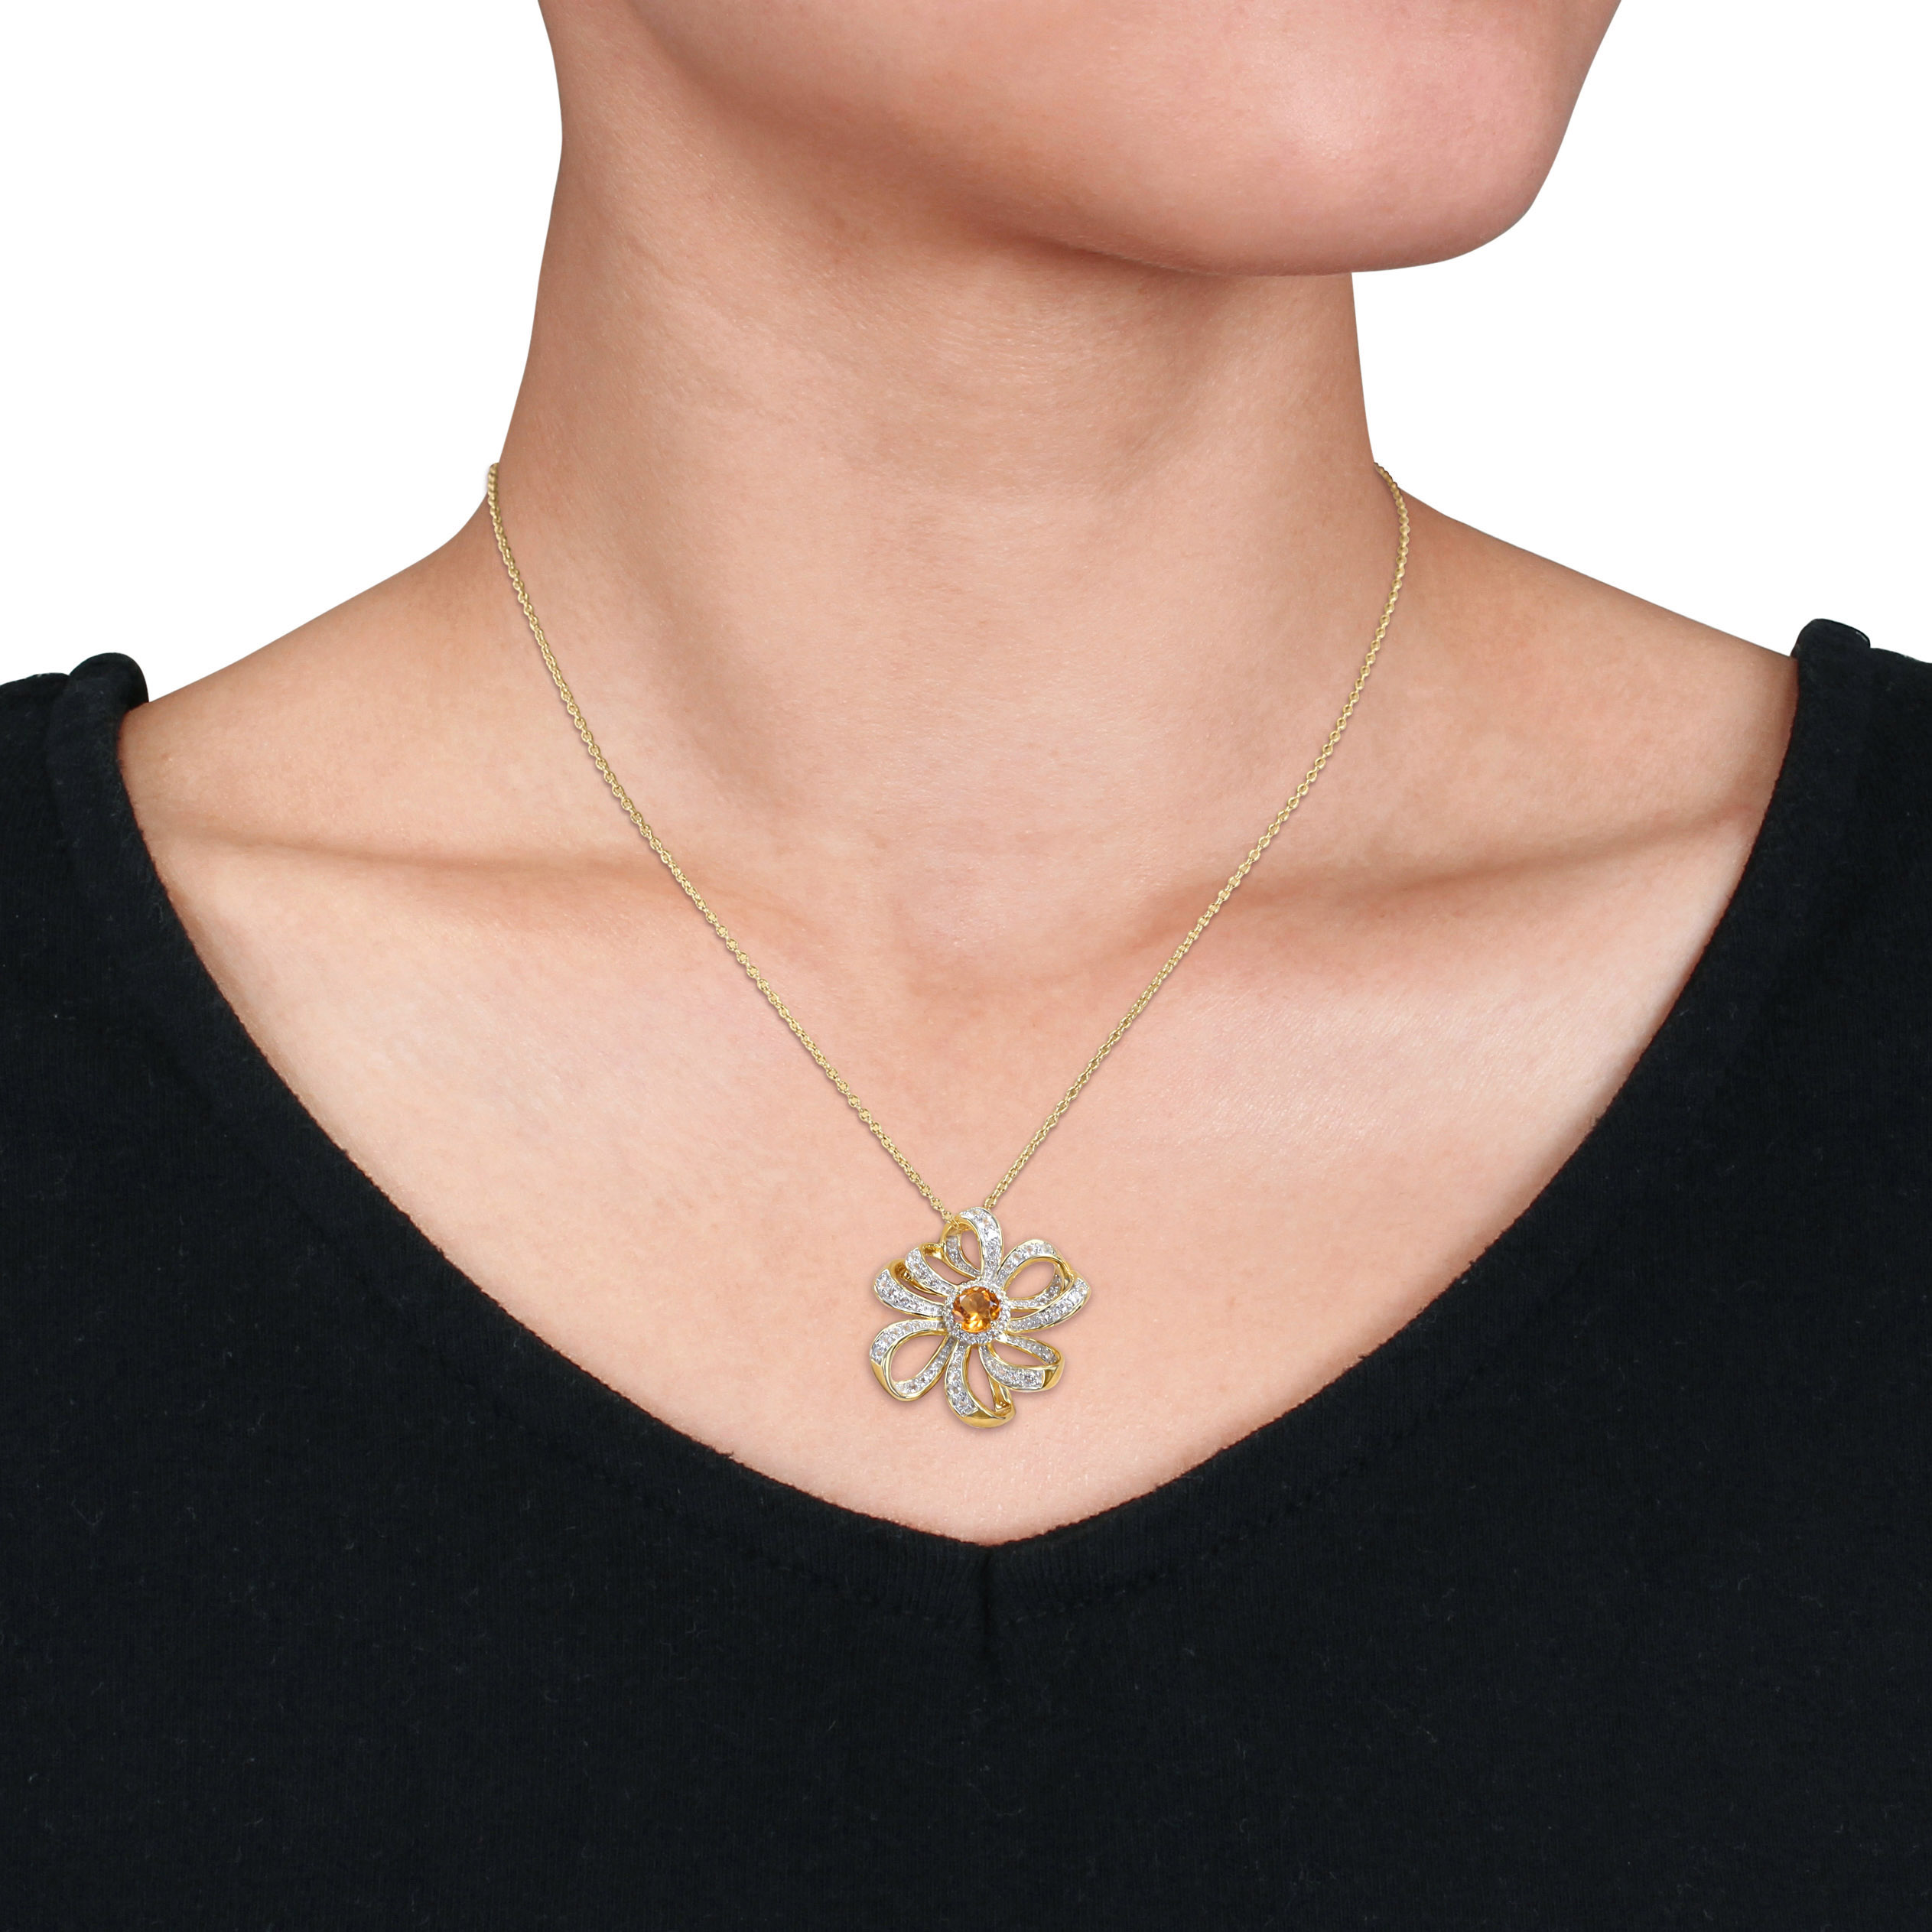 2 CT TGW Madeira Citrine and White Topaz Flower Pendant with Chain in 18k Yellow Gold Plated Sterling Silver